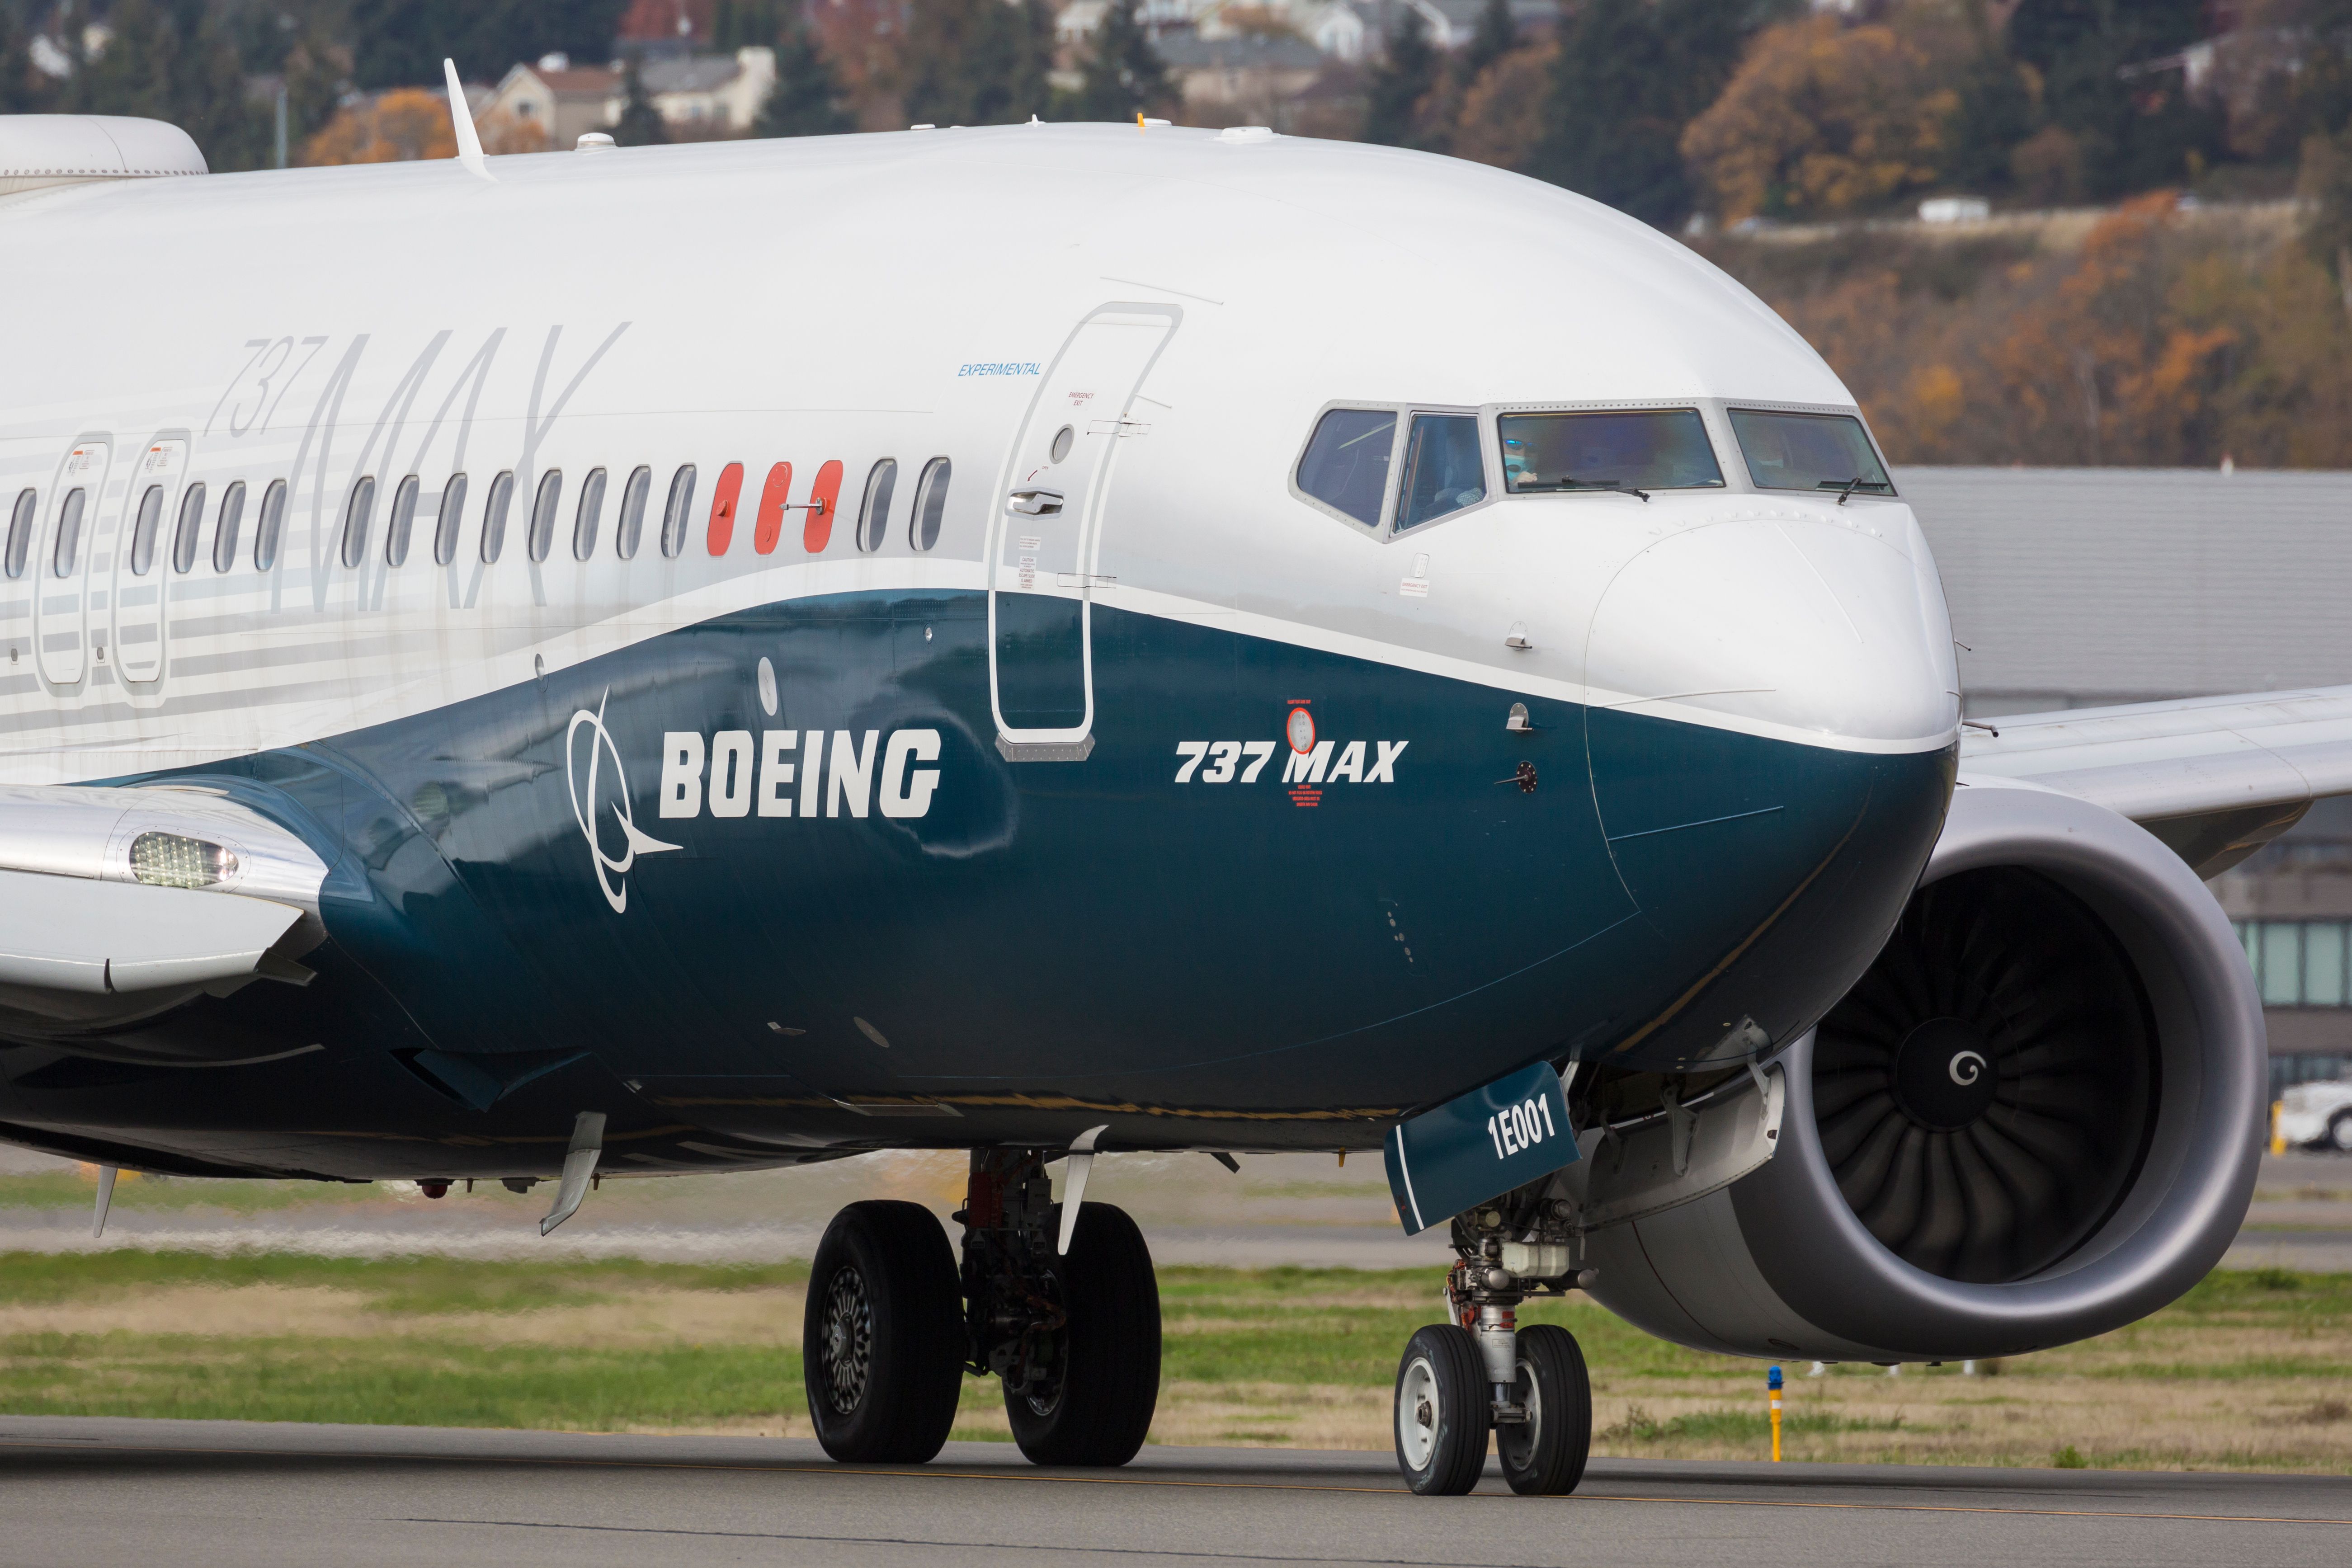 Japan Airways Reportedly Signed Deal For 21 Boeing 737 MAX Plane